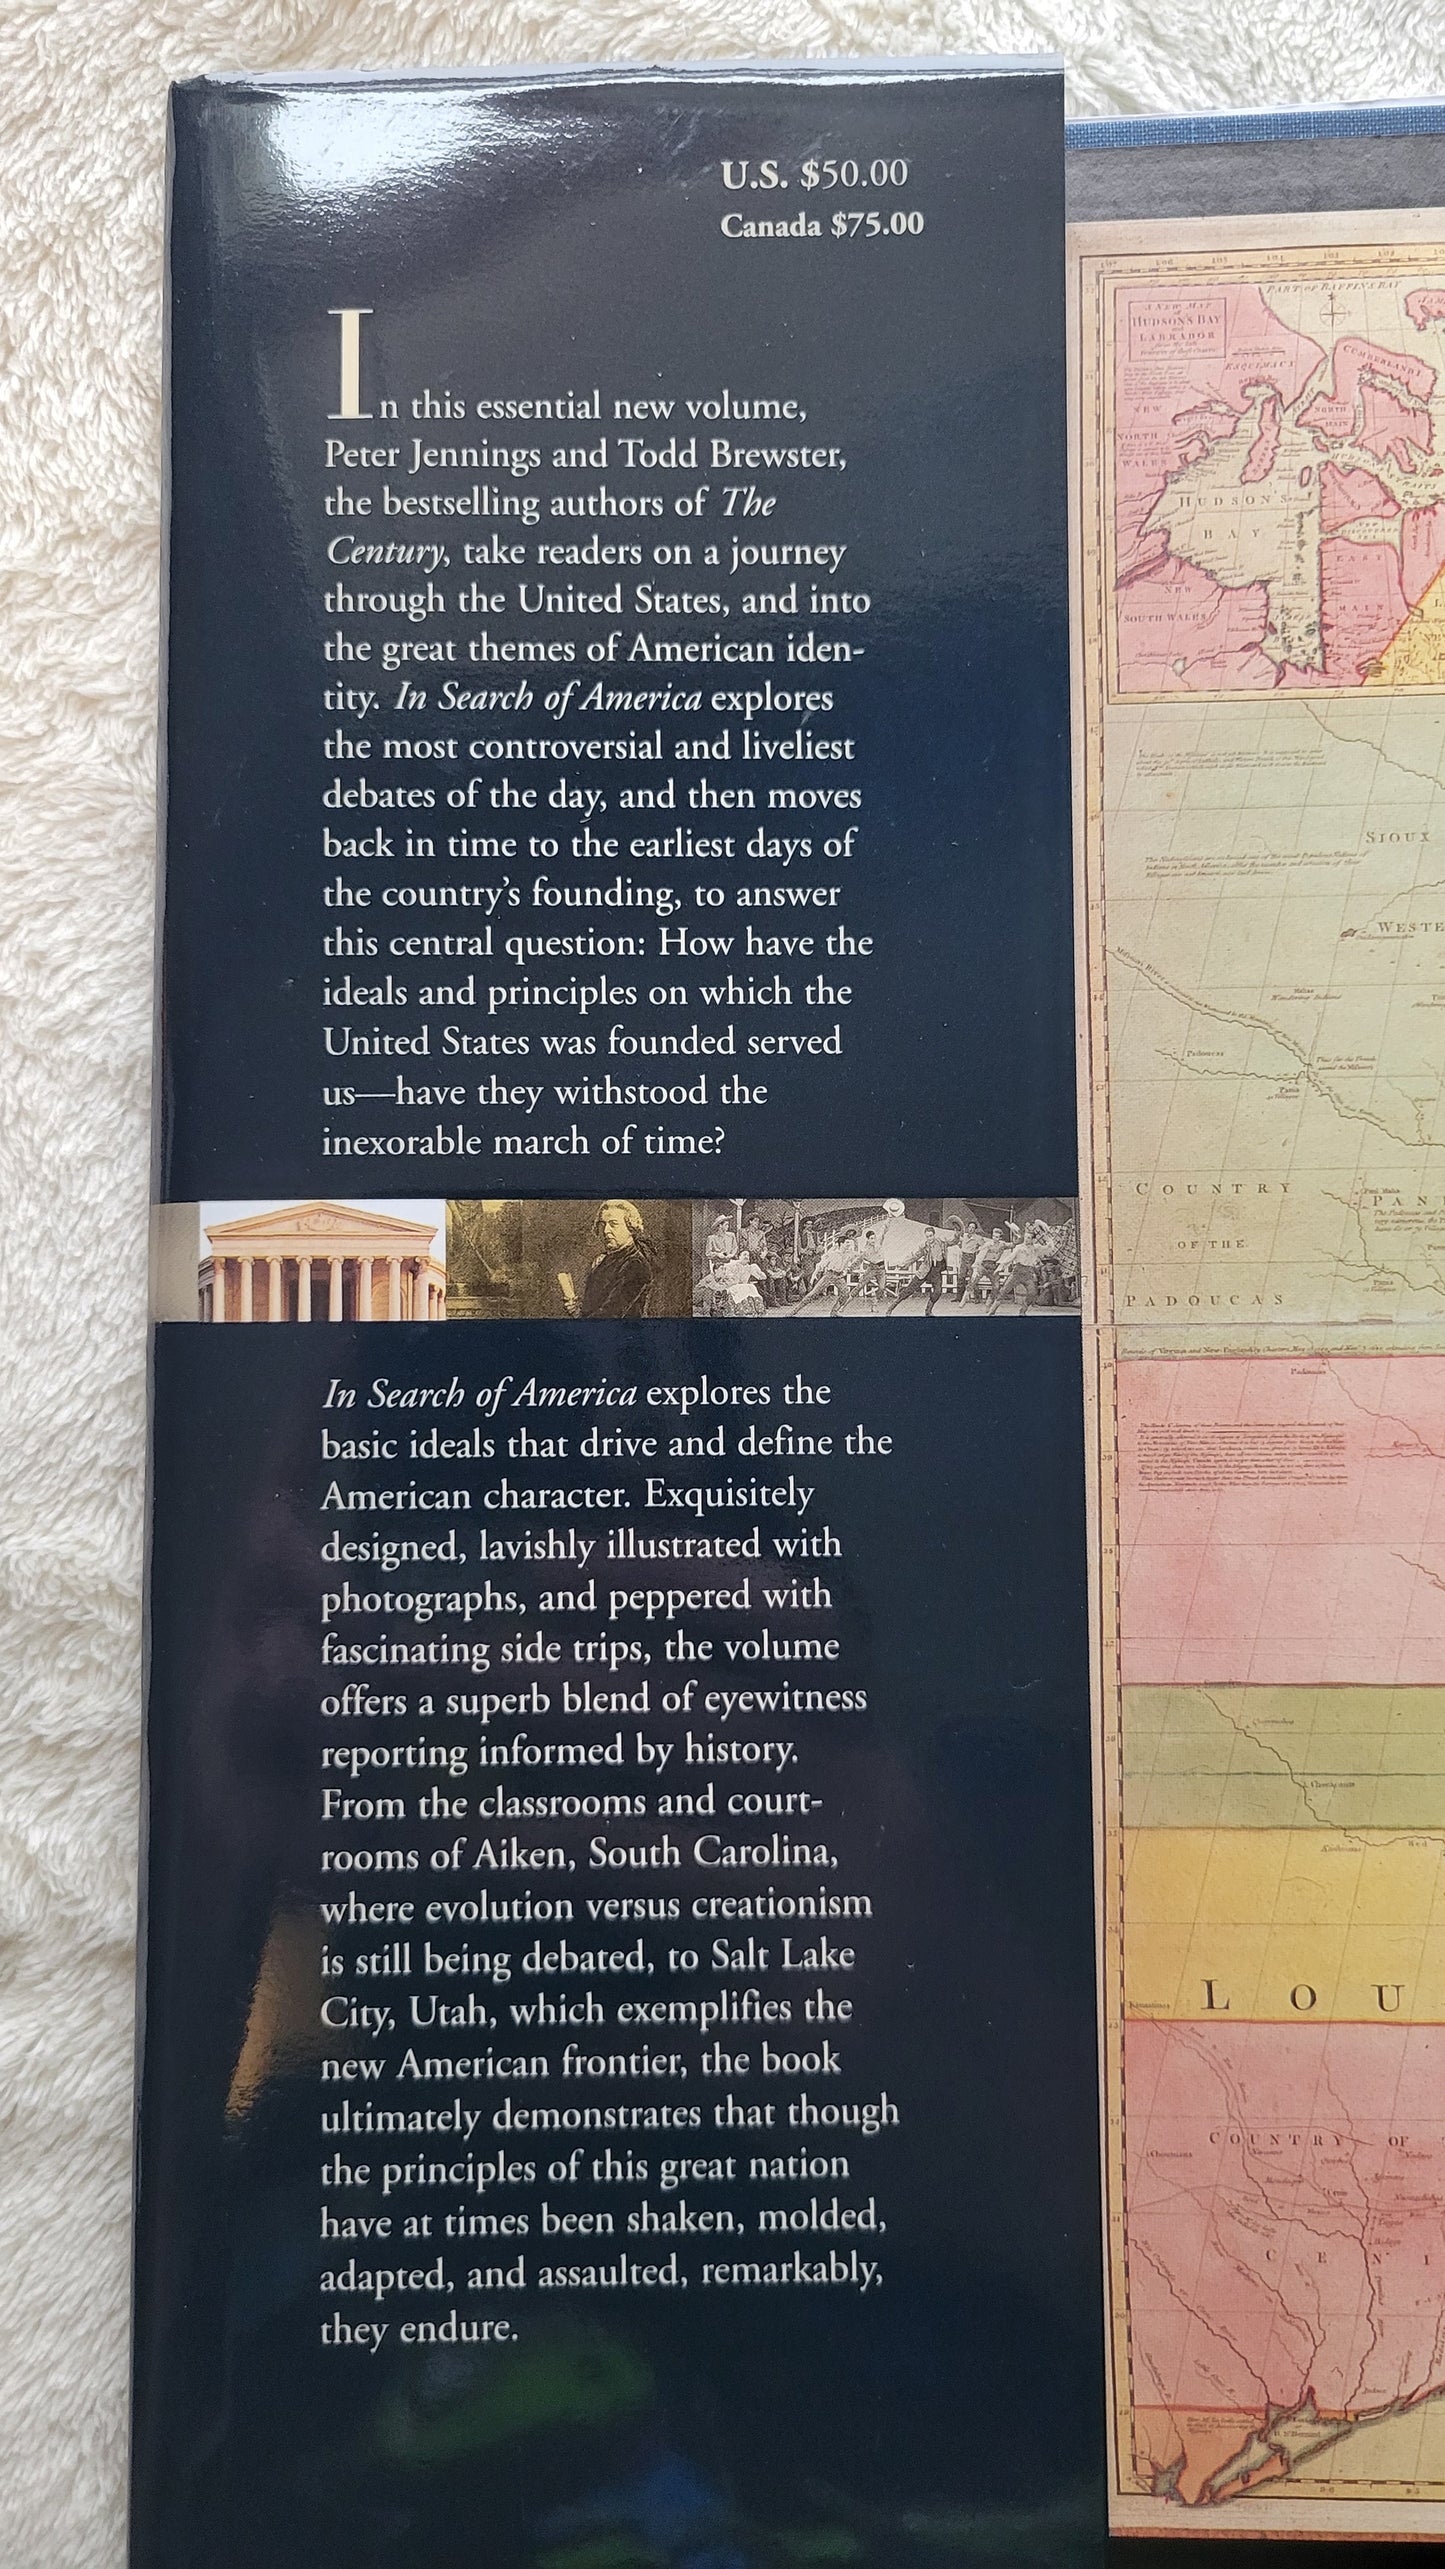 Used book for sale "In Search of America" by Peter Jennings and Todd Brewster, published by Hyperion, 2002, first edition. View of jacket panel.